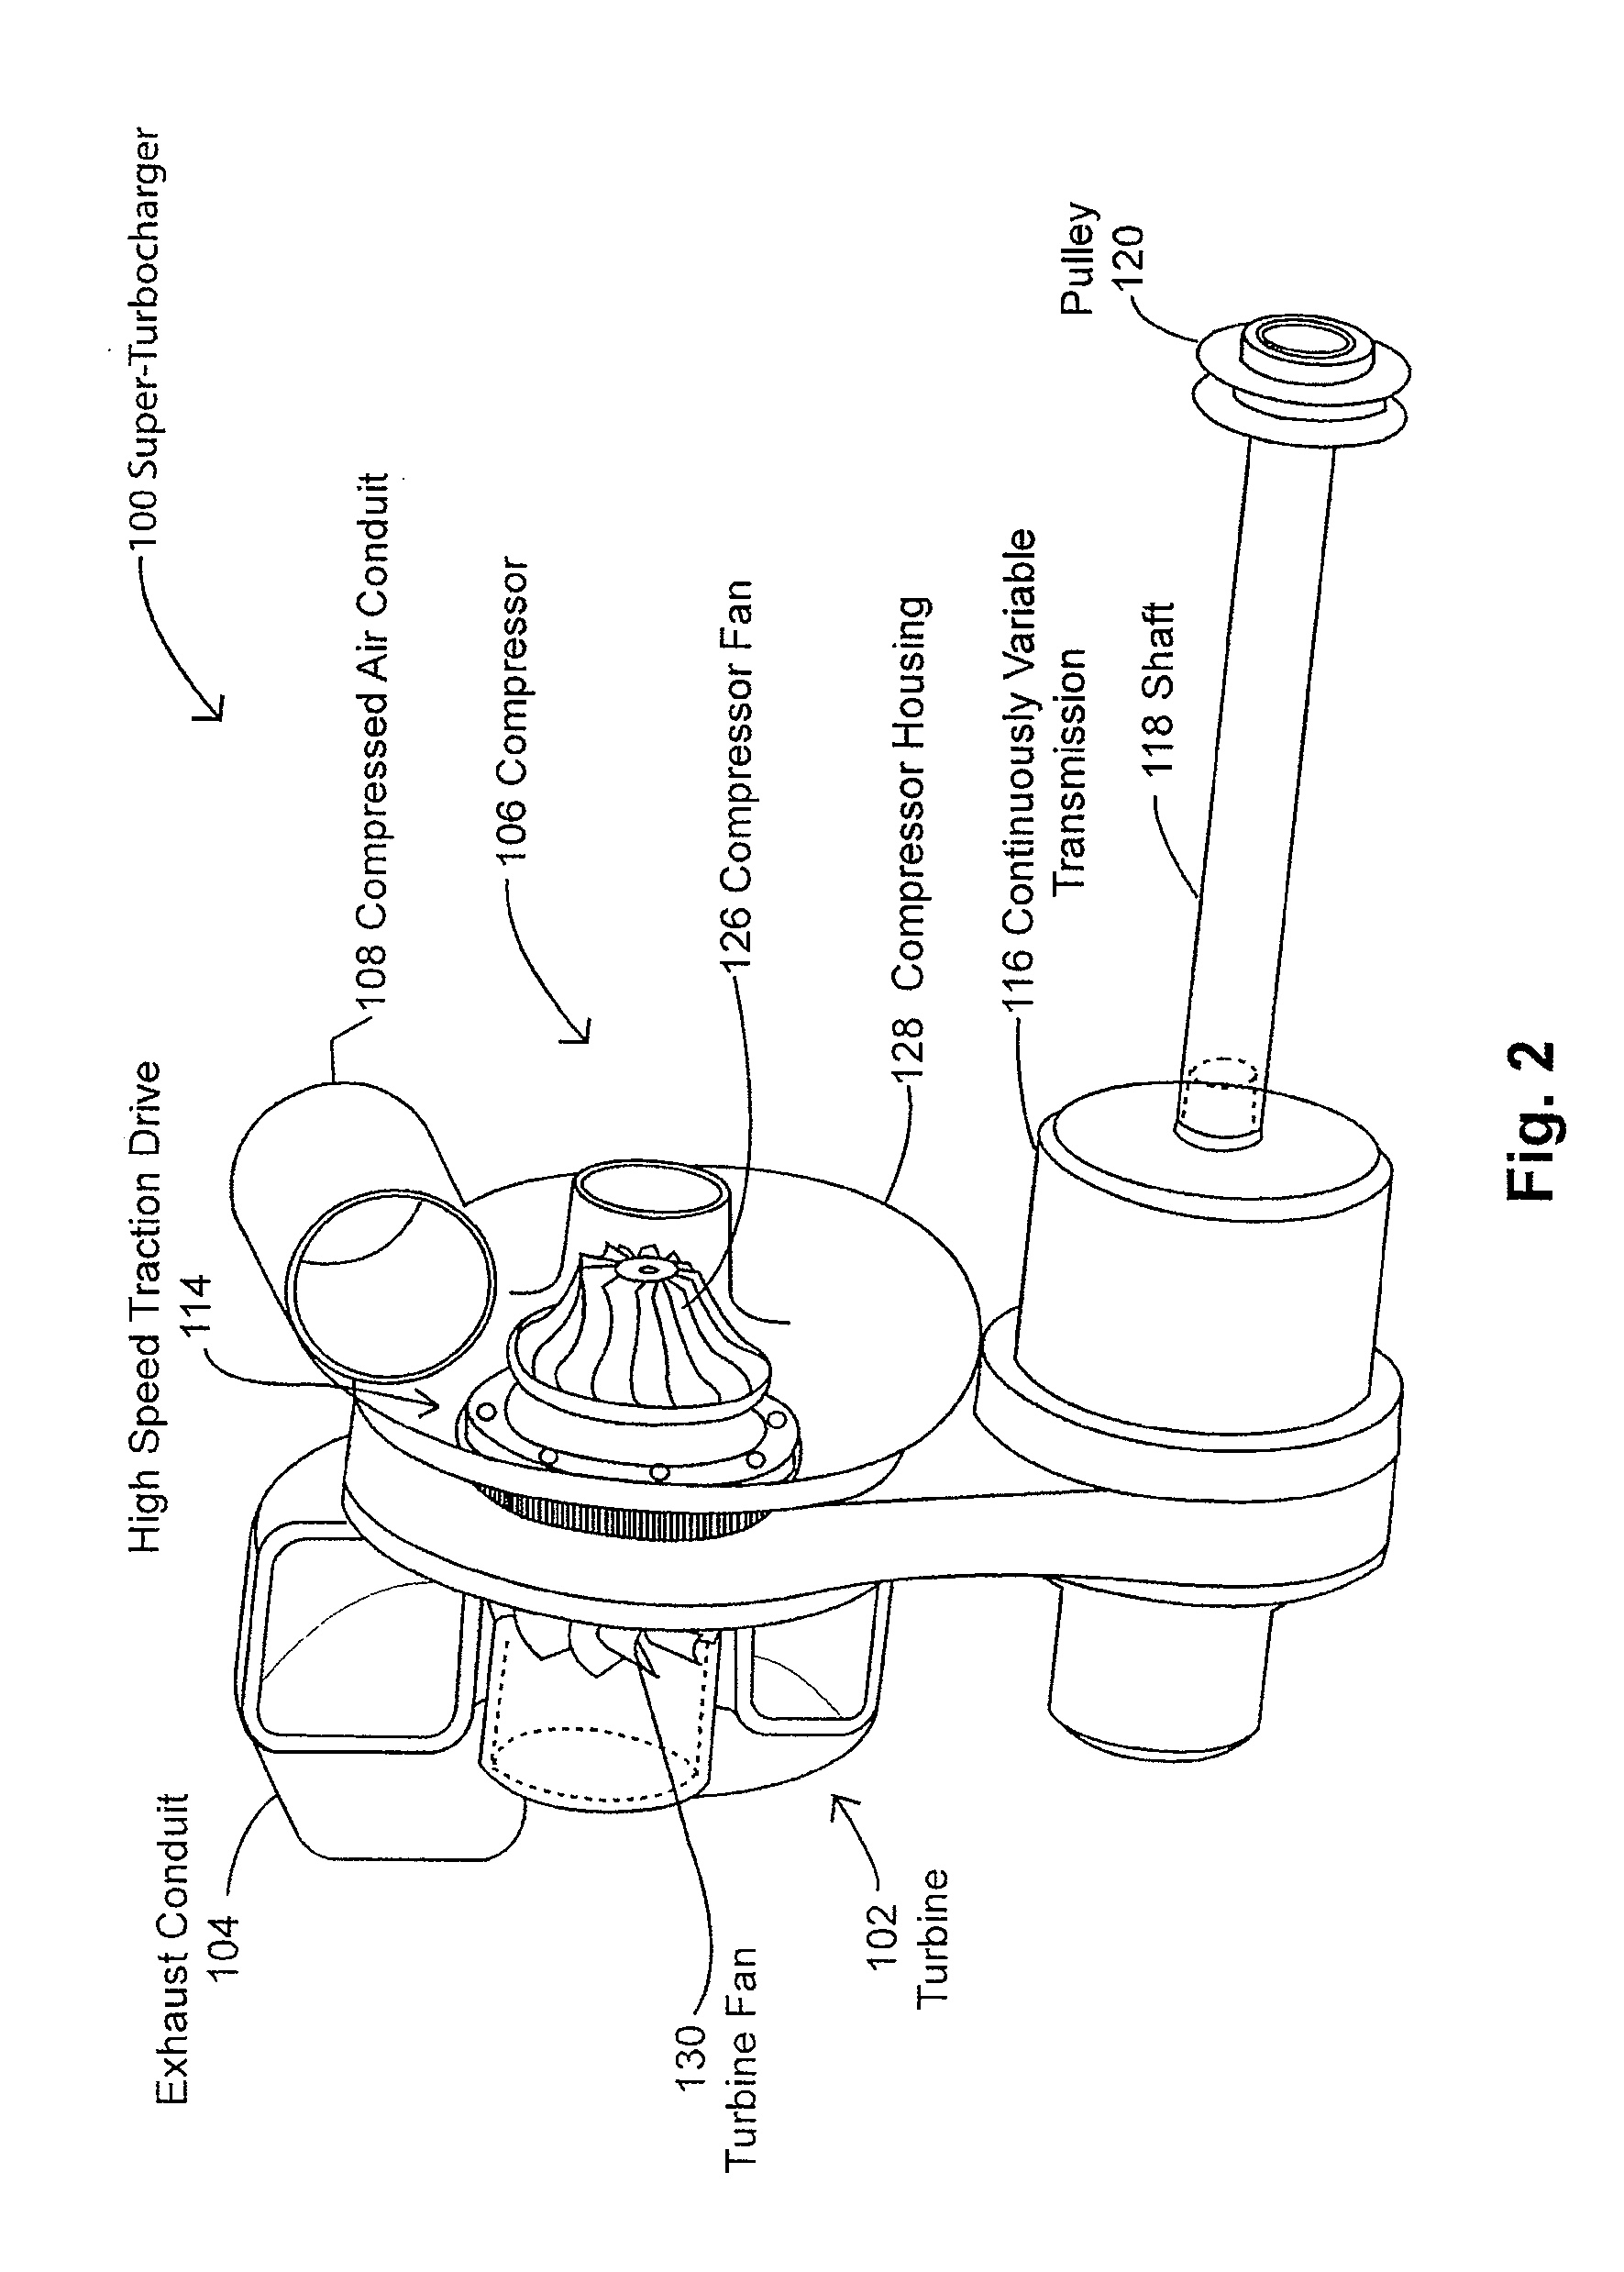 Super-turbocharger having a high speed traction drive and a continuously variable transmission